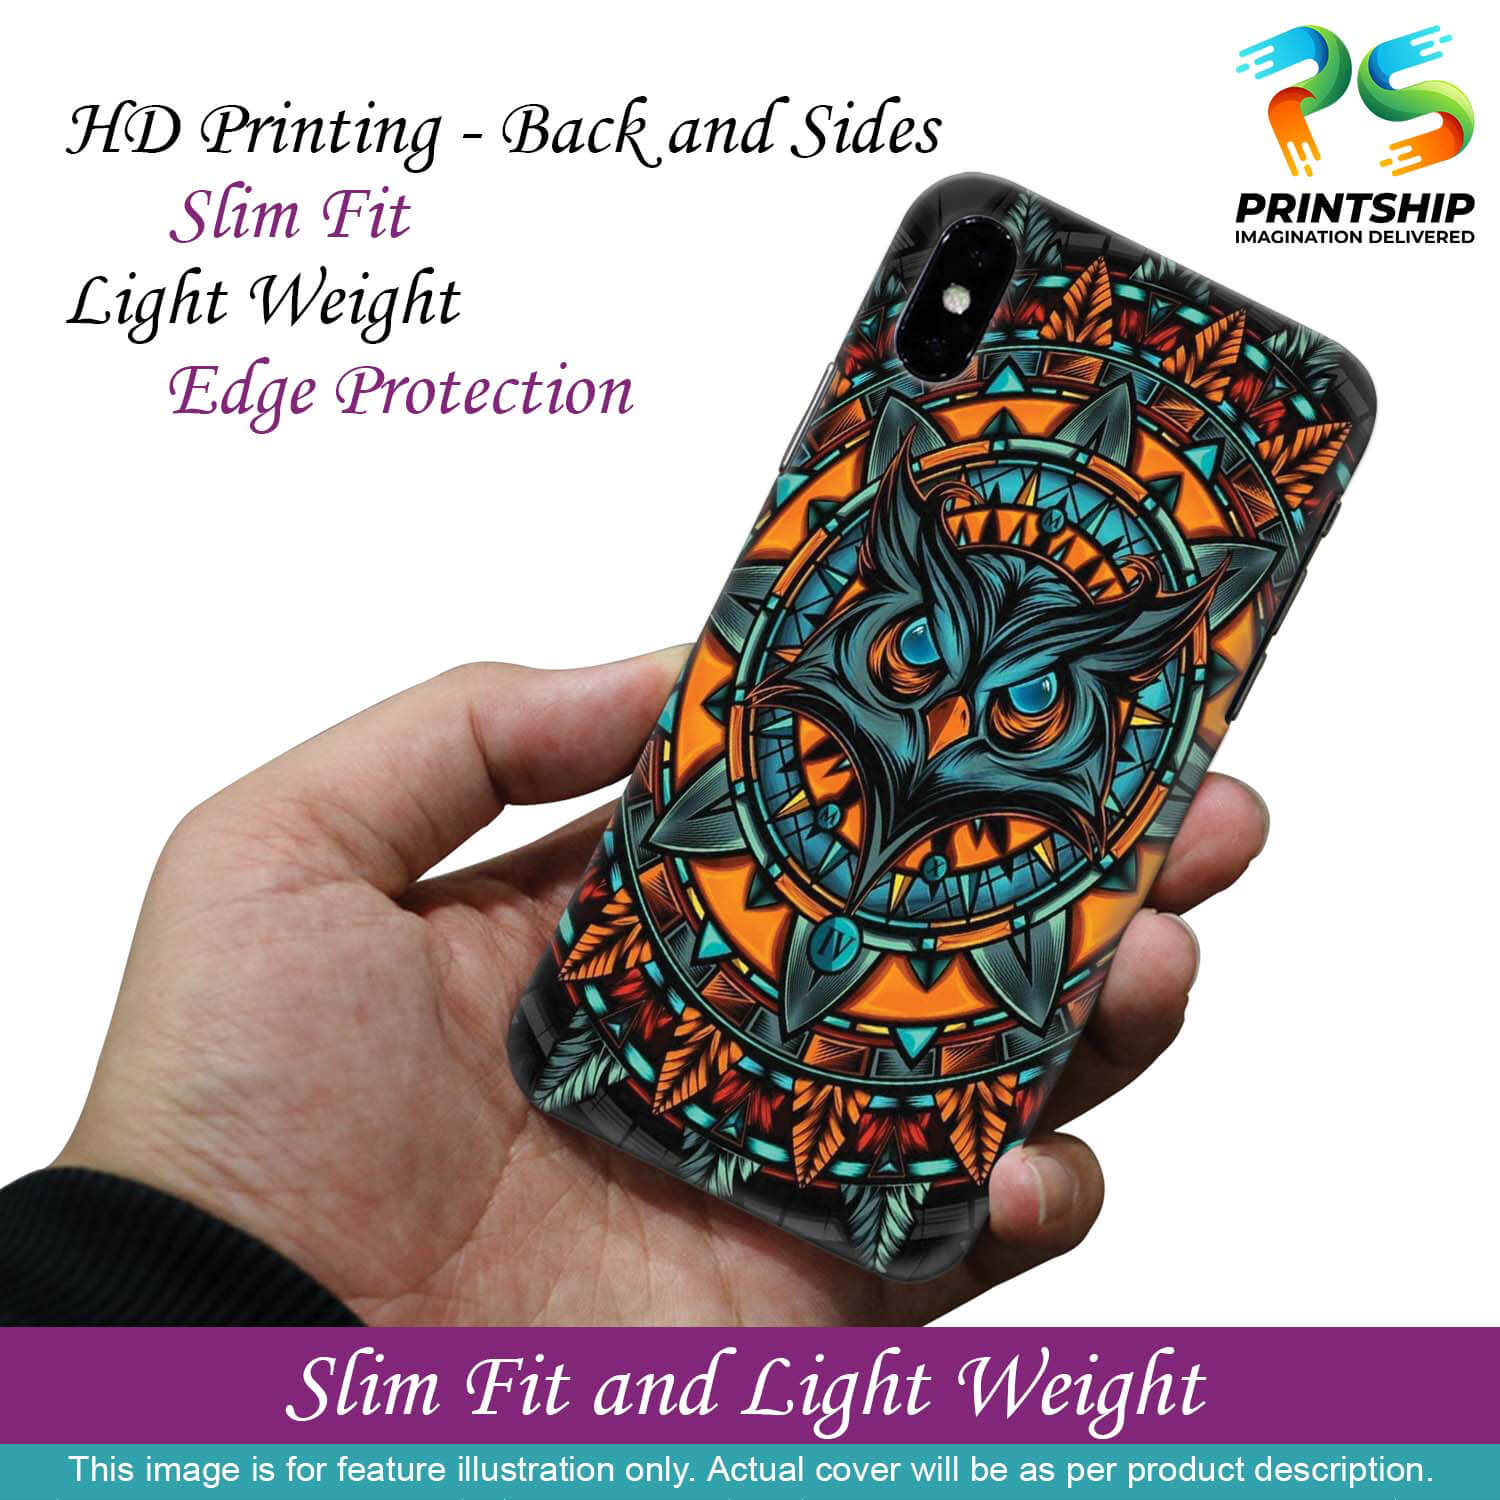 PS1338-Premium Owl Back Cover for Apple iPhone X